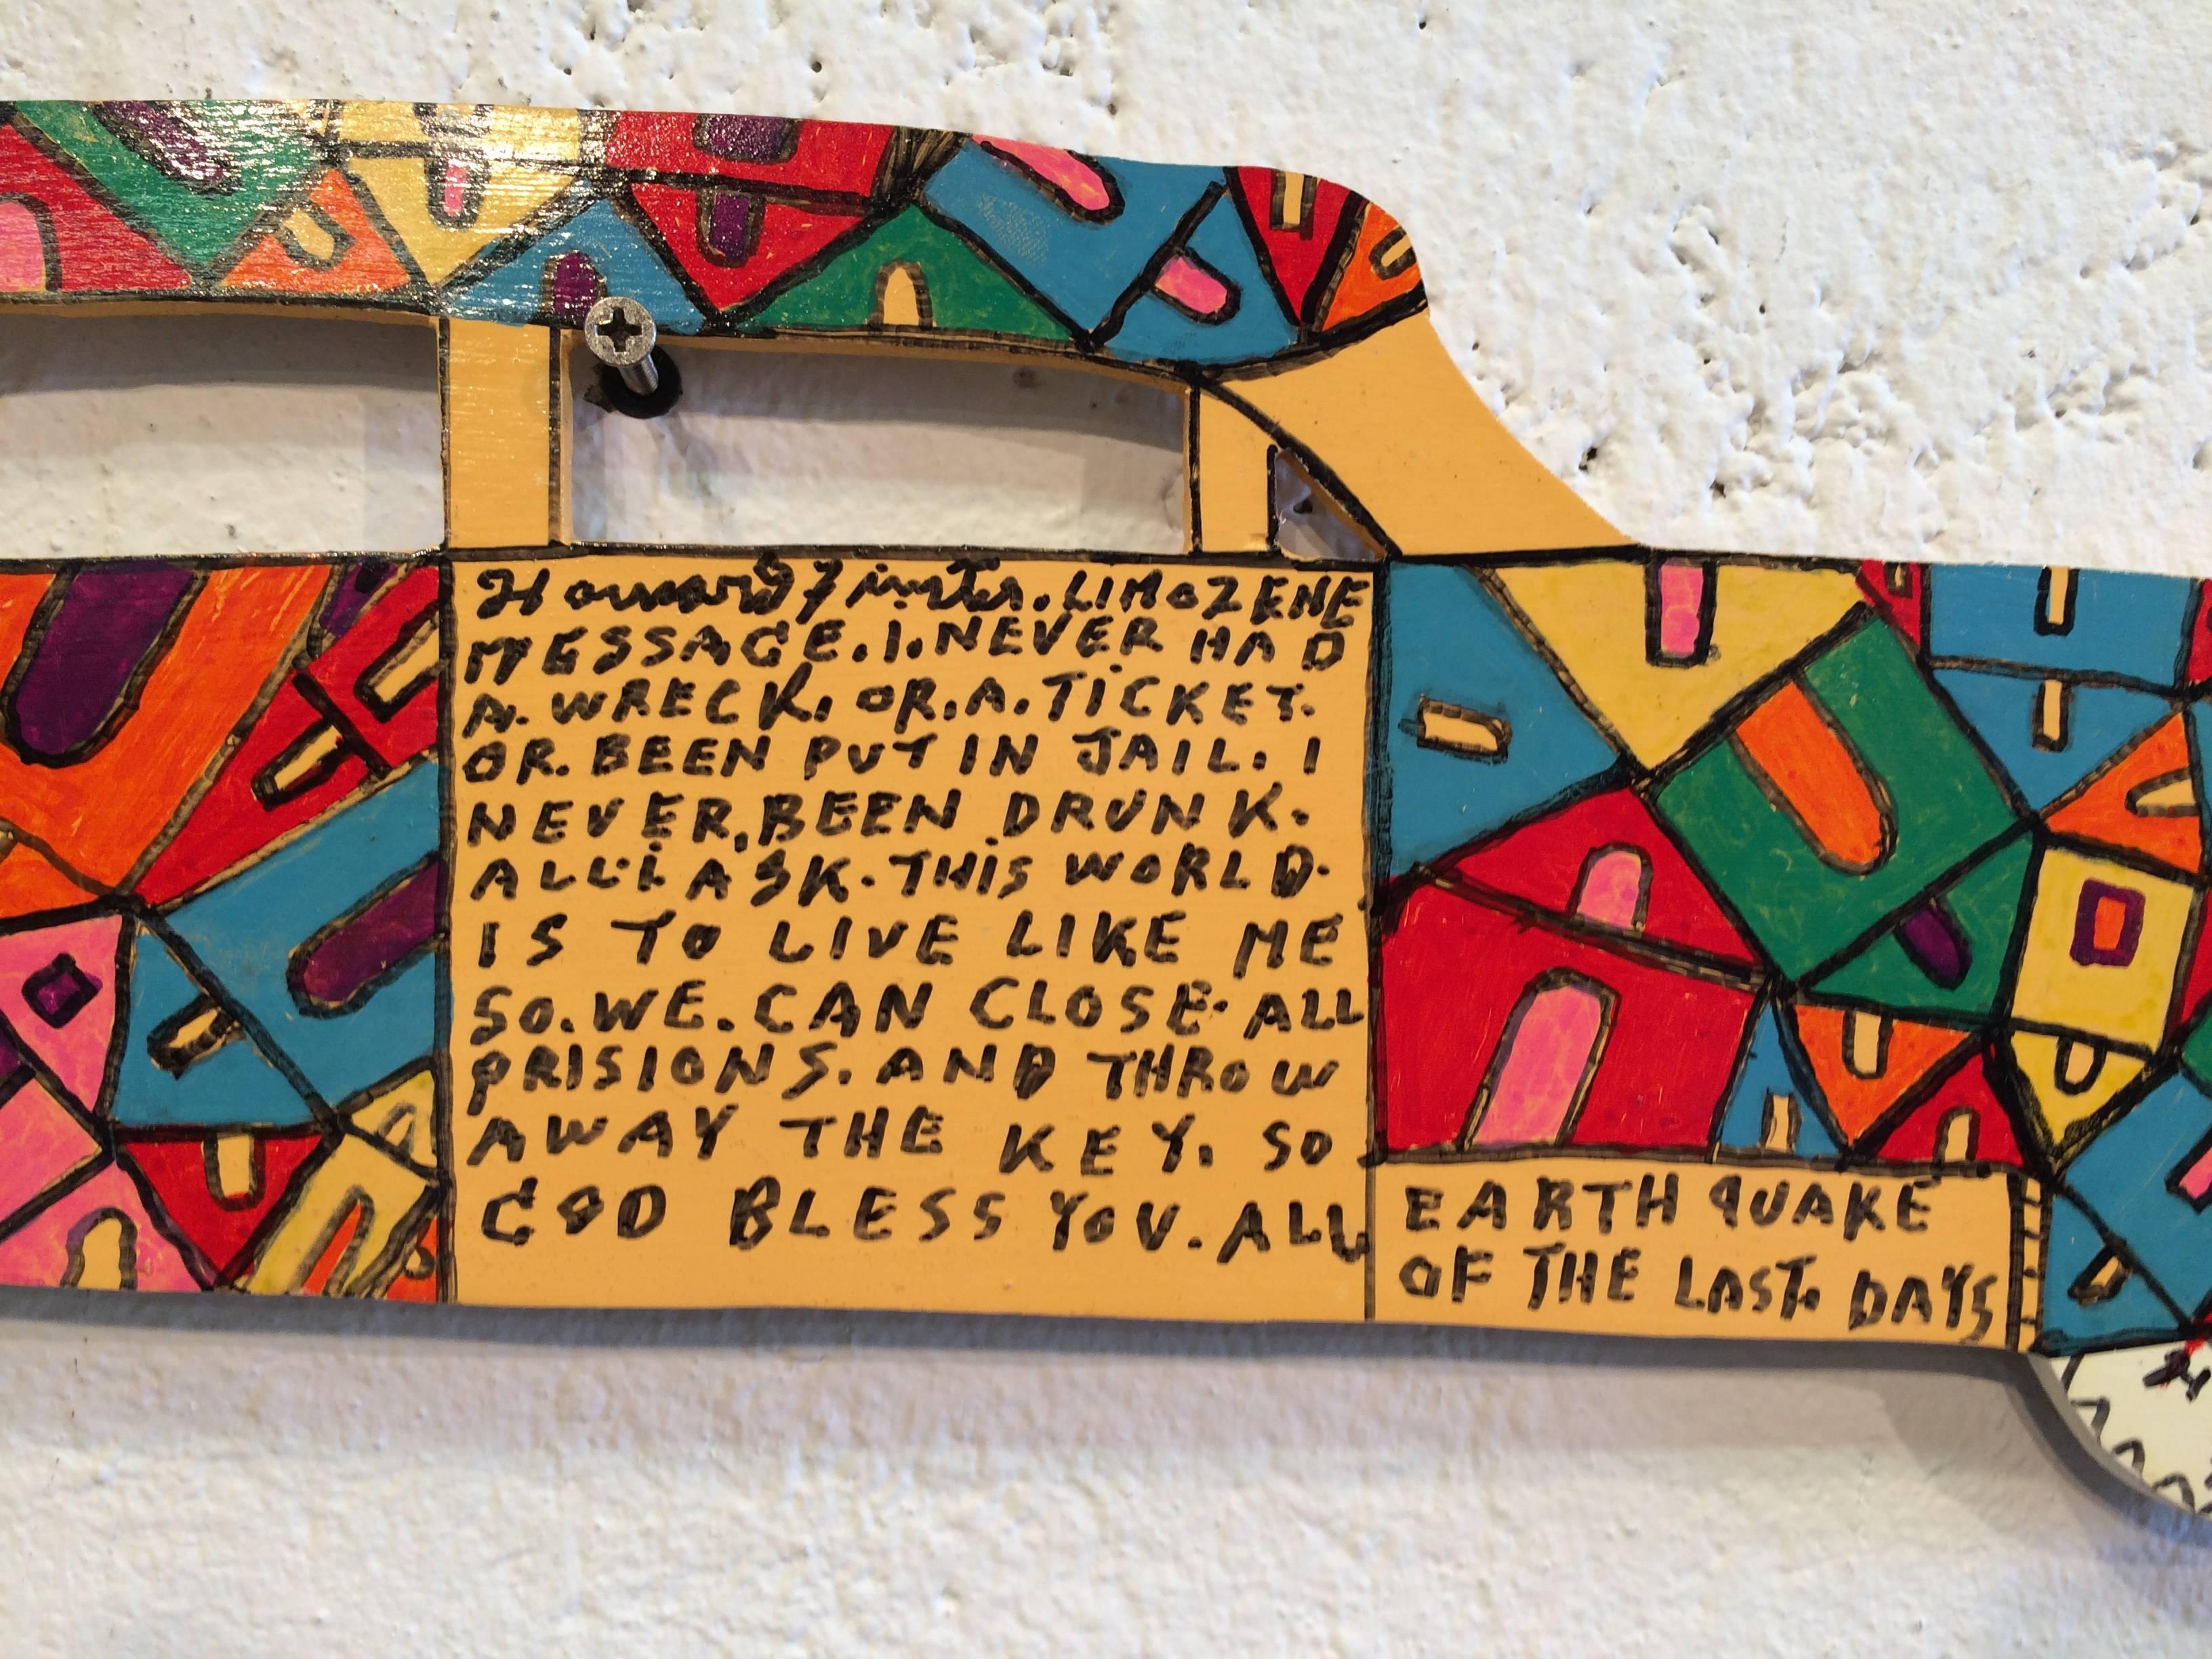 Hand-carved hand-painted wooden sculpture by Artist Howard Finster.